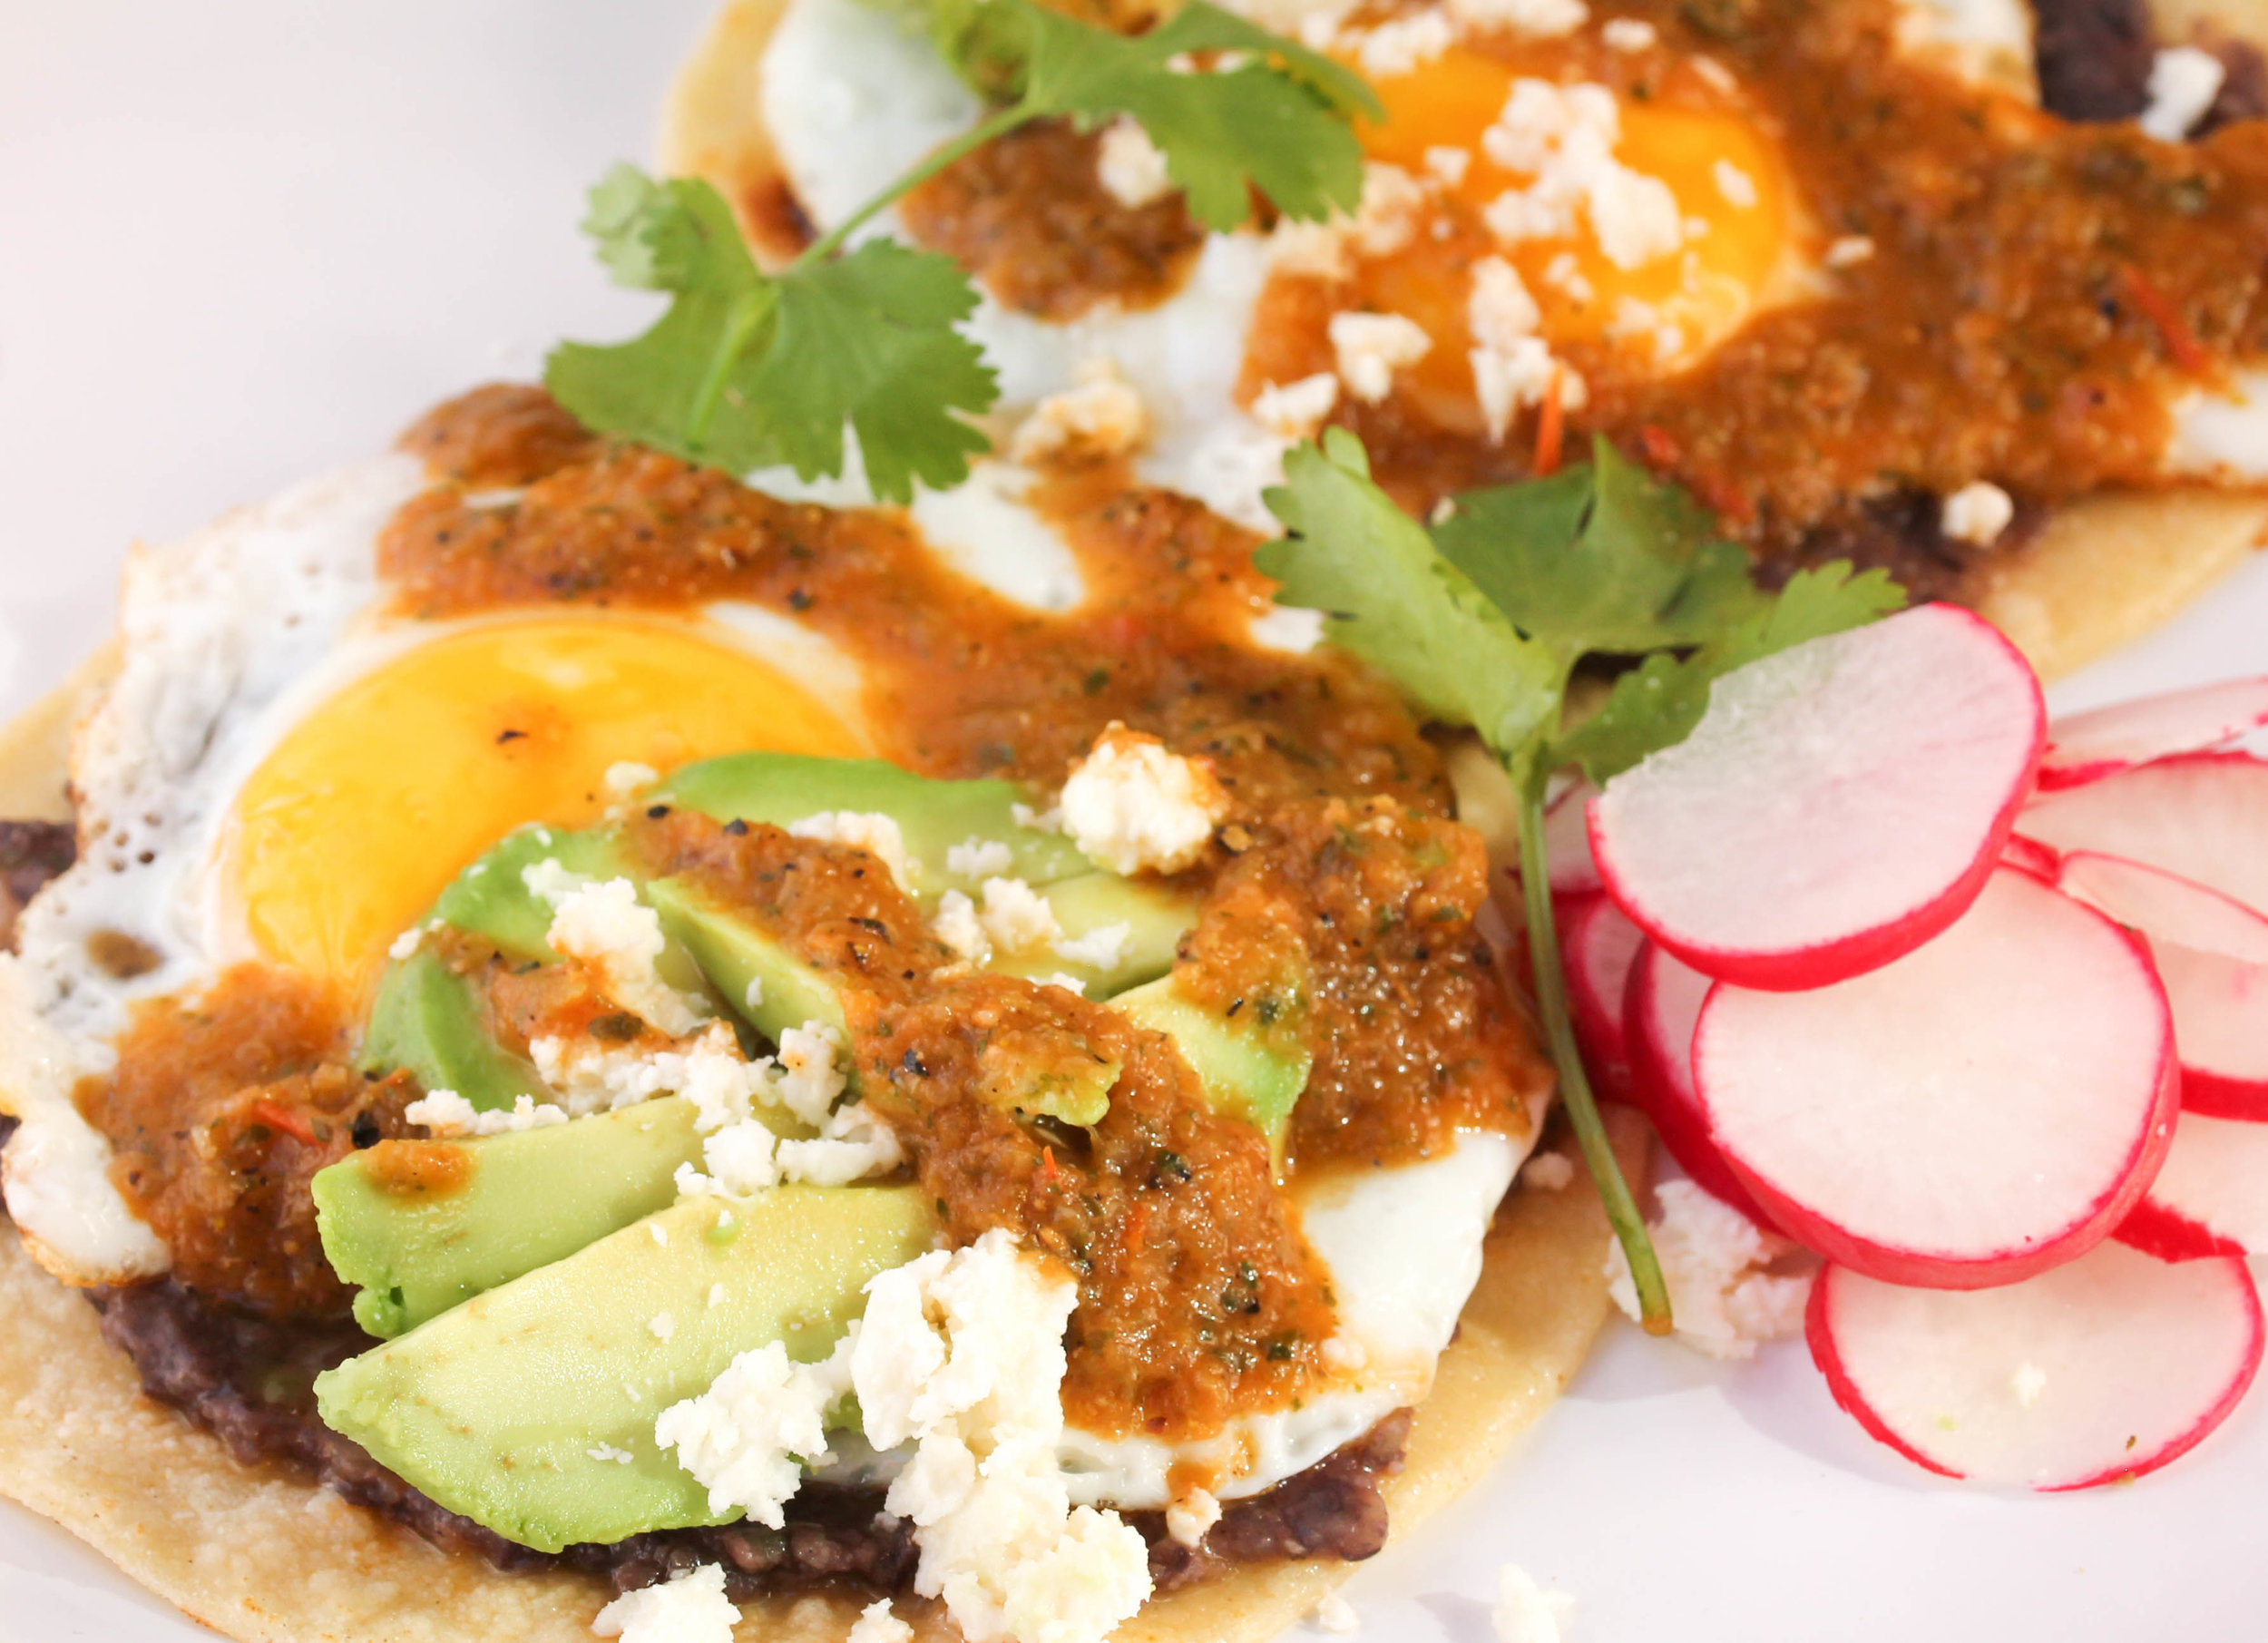 Entertain your guests with Huevos Rancheros, a popular Mexican breakfast from the comfort of your own kitchen! It's easy, wholesome, delicious, and naturally gluten-free.